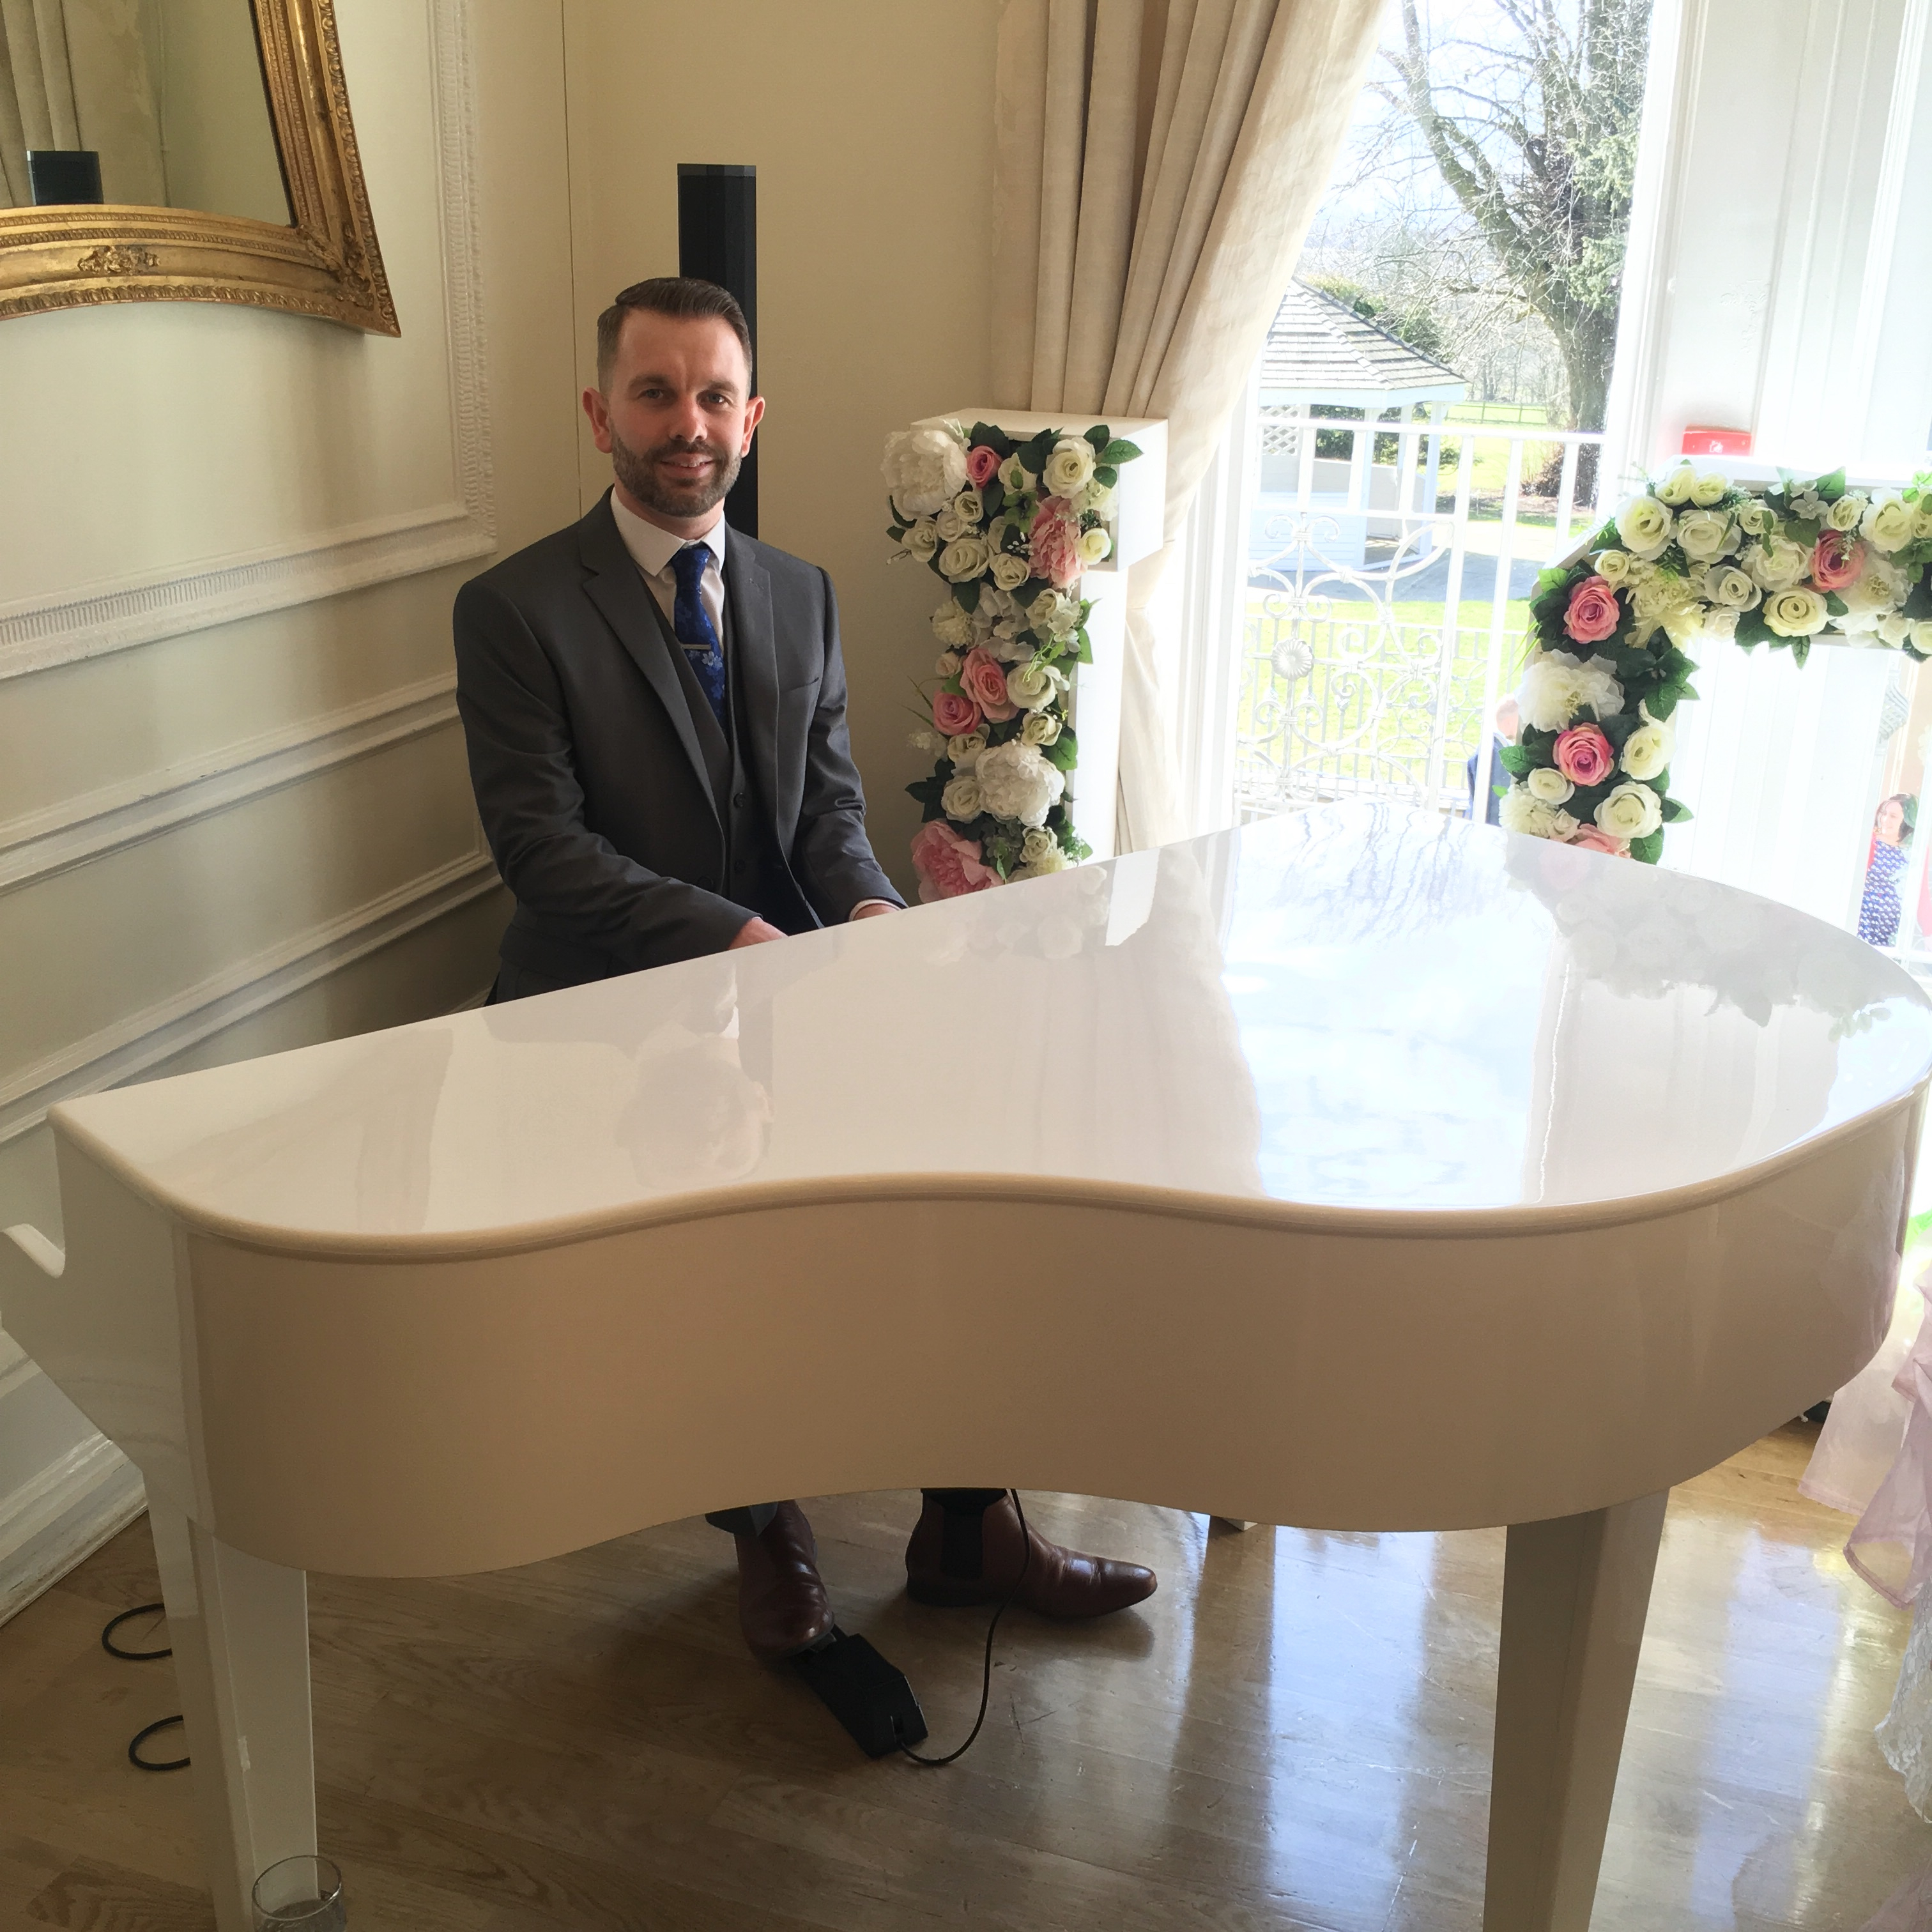 Piano player for West Tower wedding ceremony